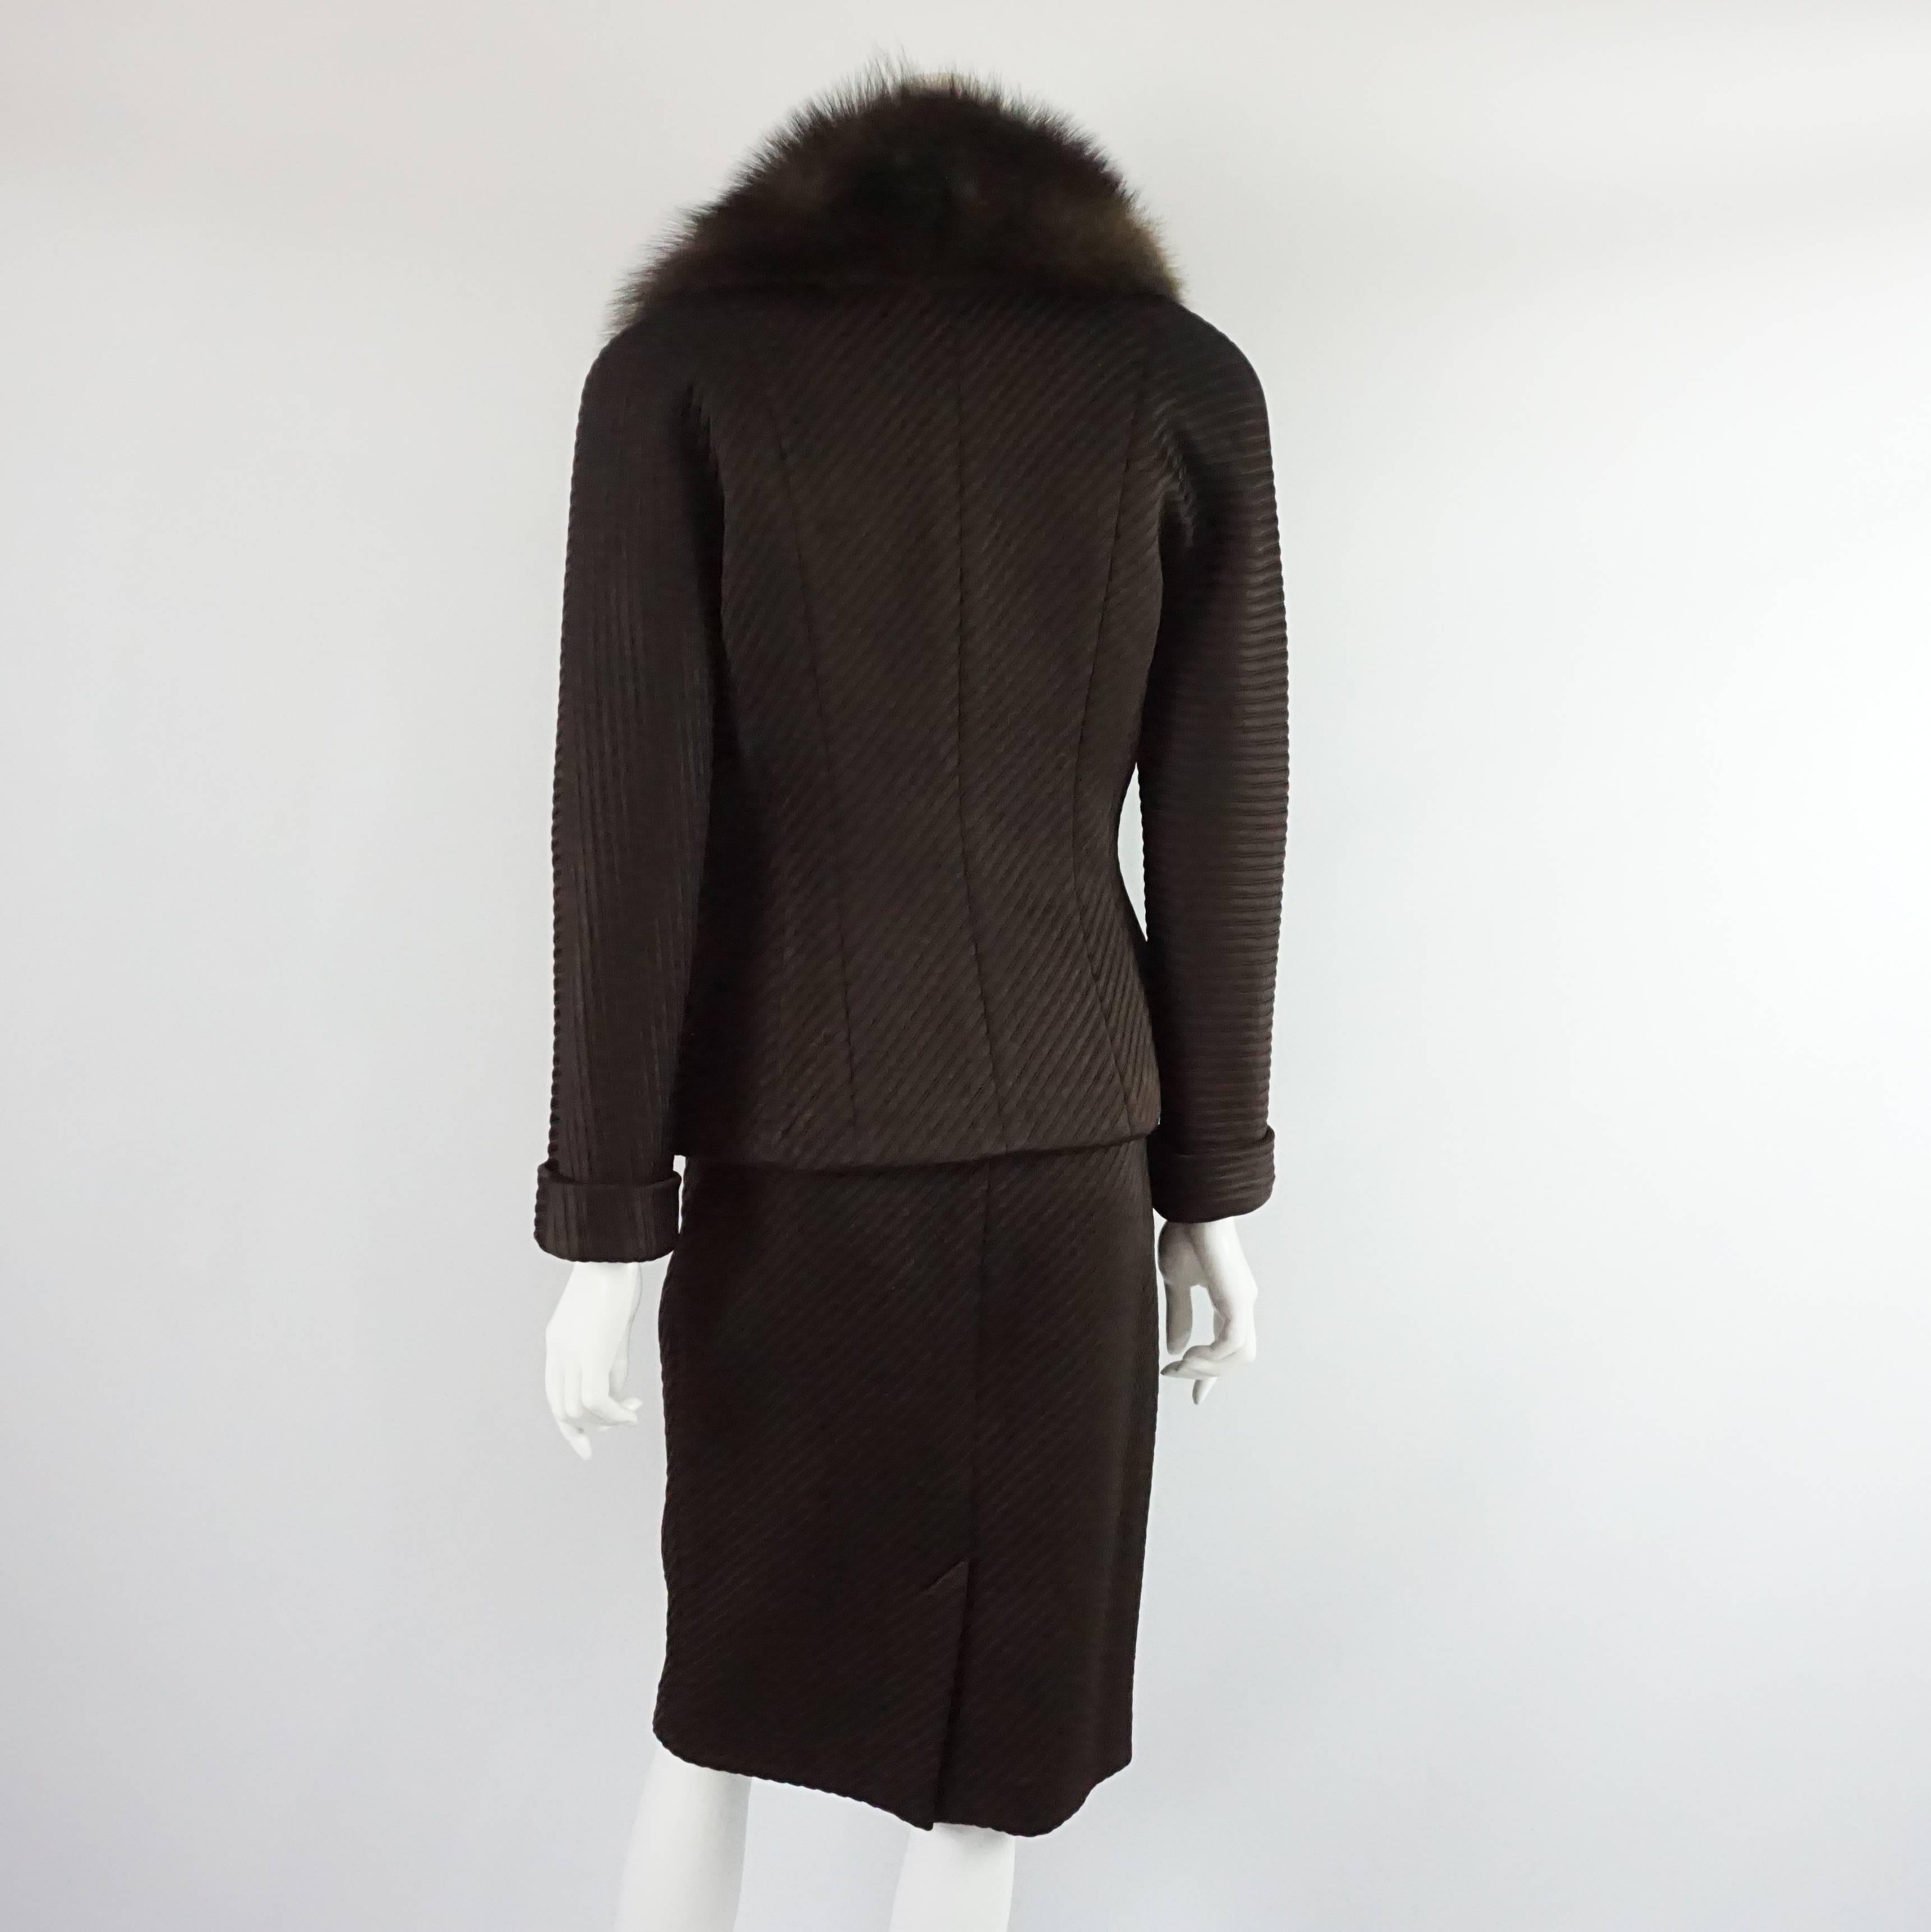 Black Fendi Chocolate Brown Ribbed Skirt Suit with Fisher Fur Collar - 44 - 1970's  For Sale